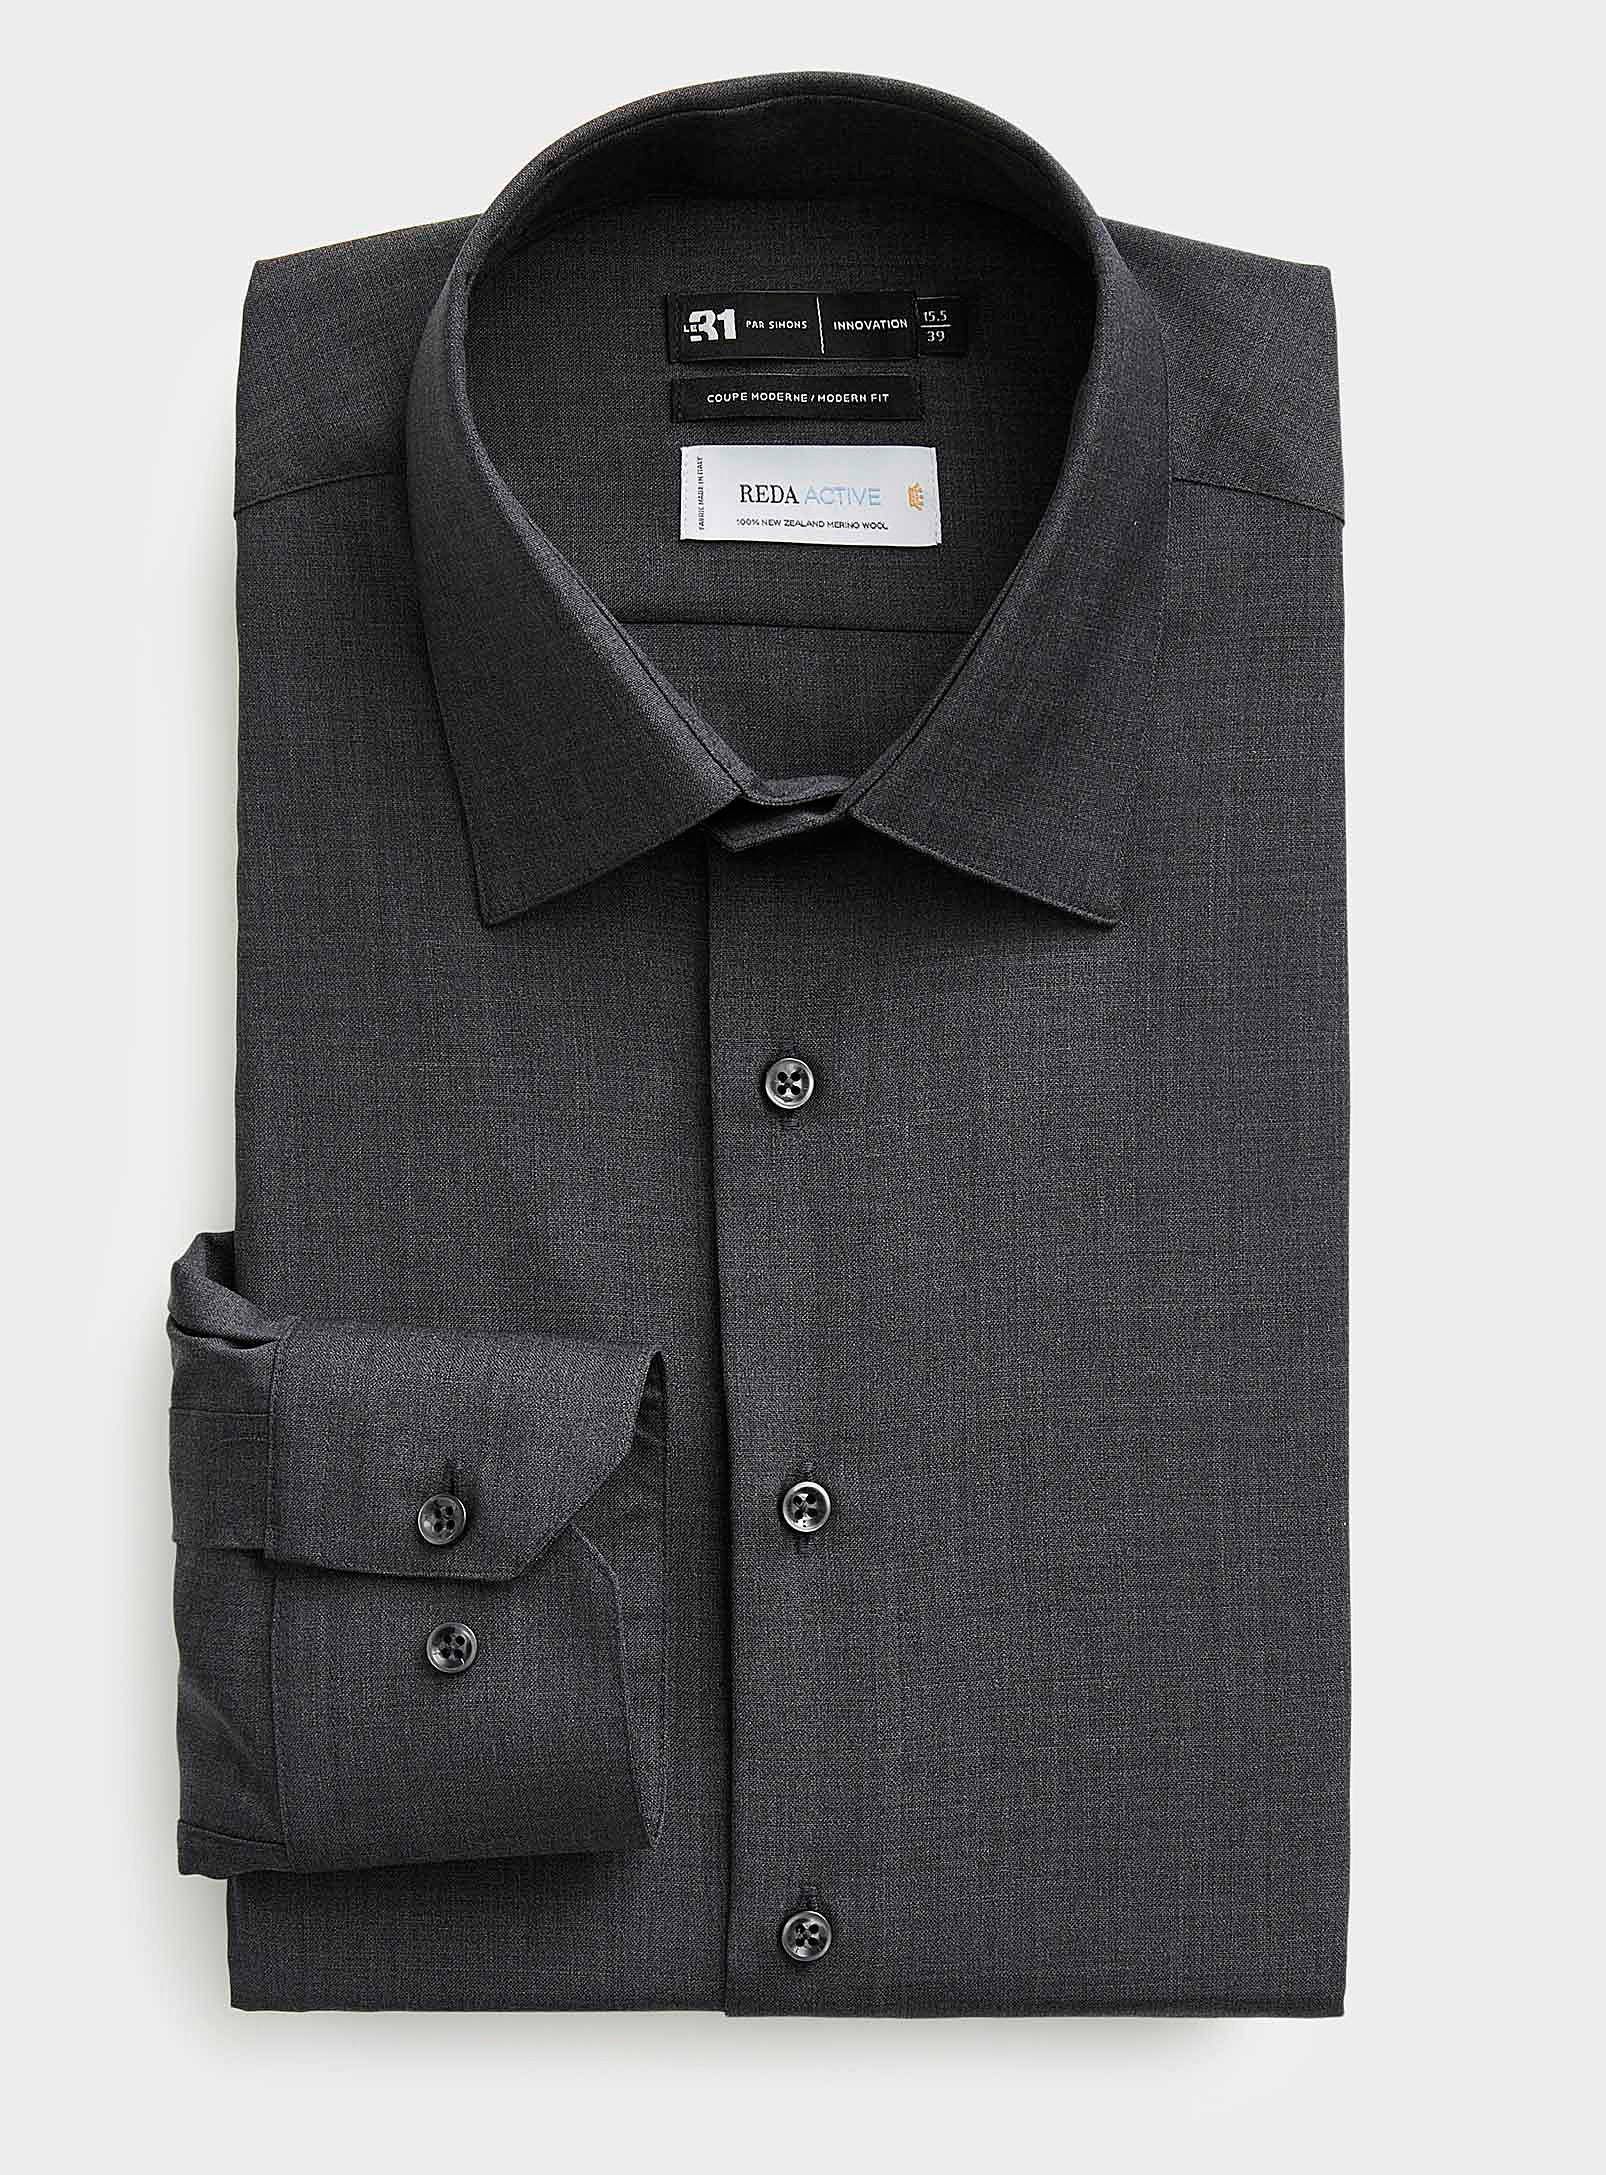 Le 31 Pure Merino Wool Shirt Modern Fit Innovation Collection In Dark Grey